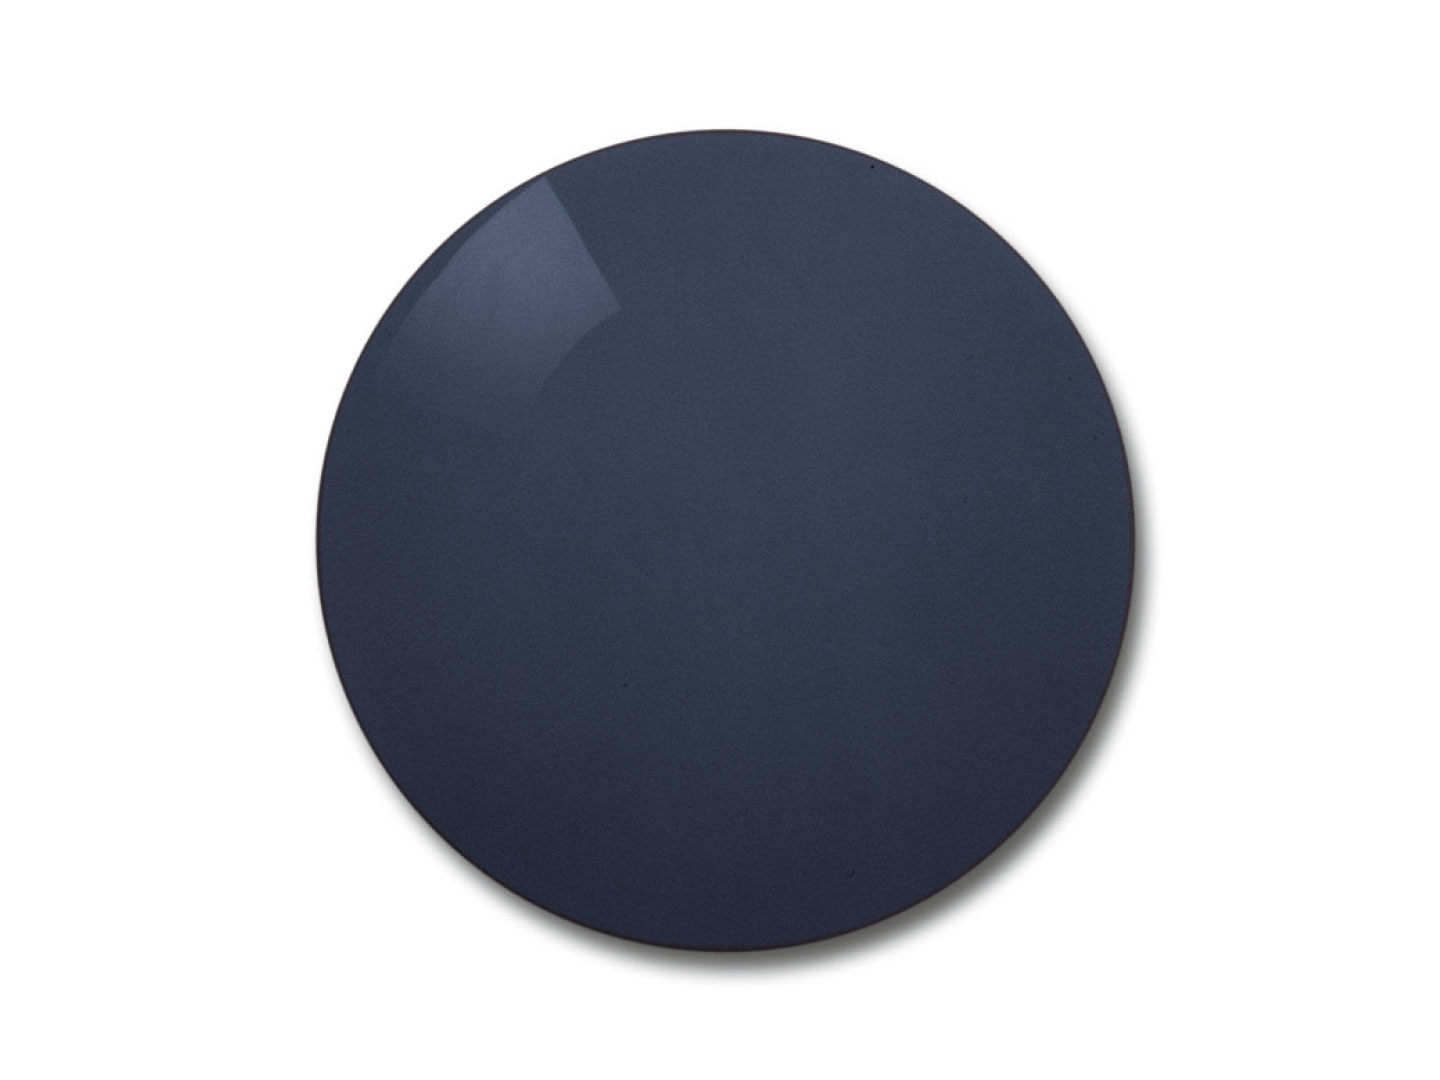 Color example for the grey polarized lenses.